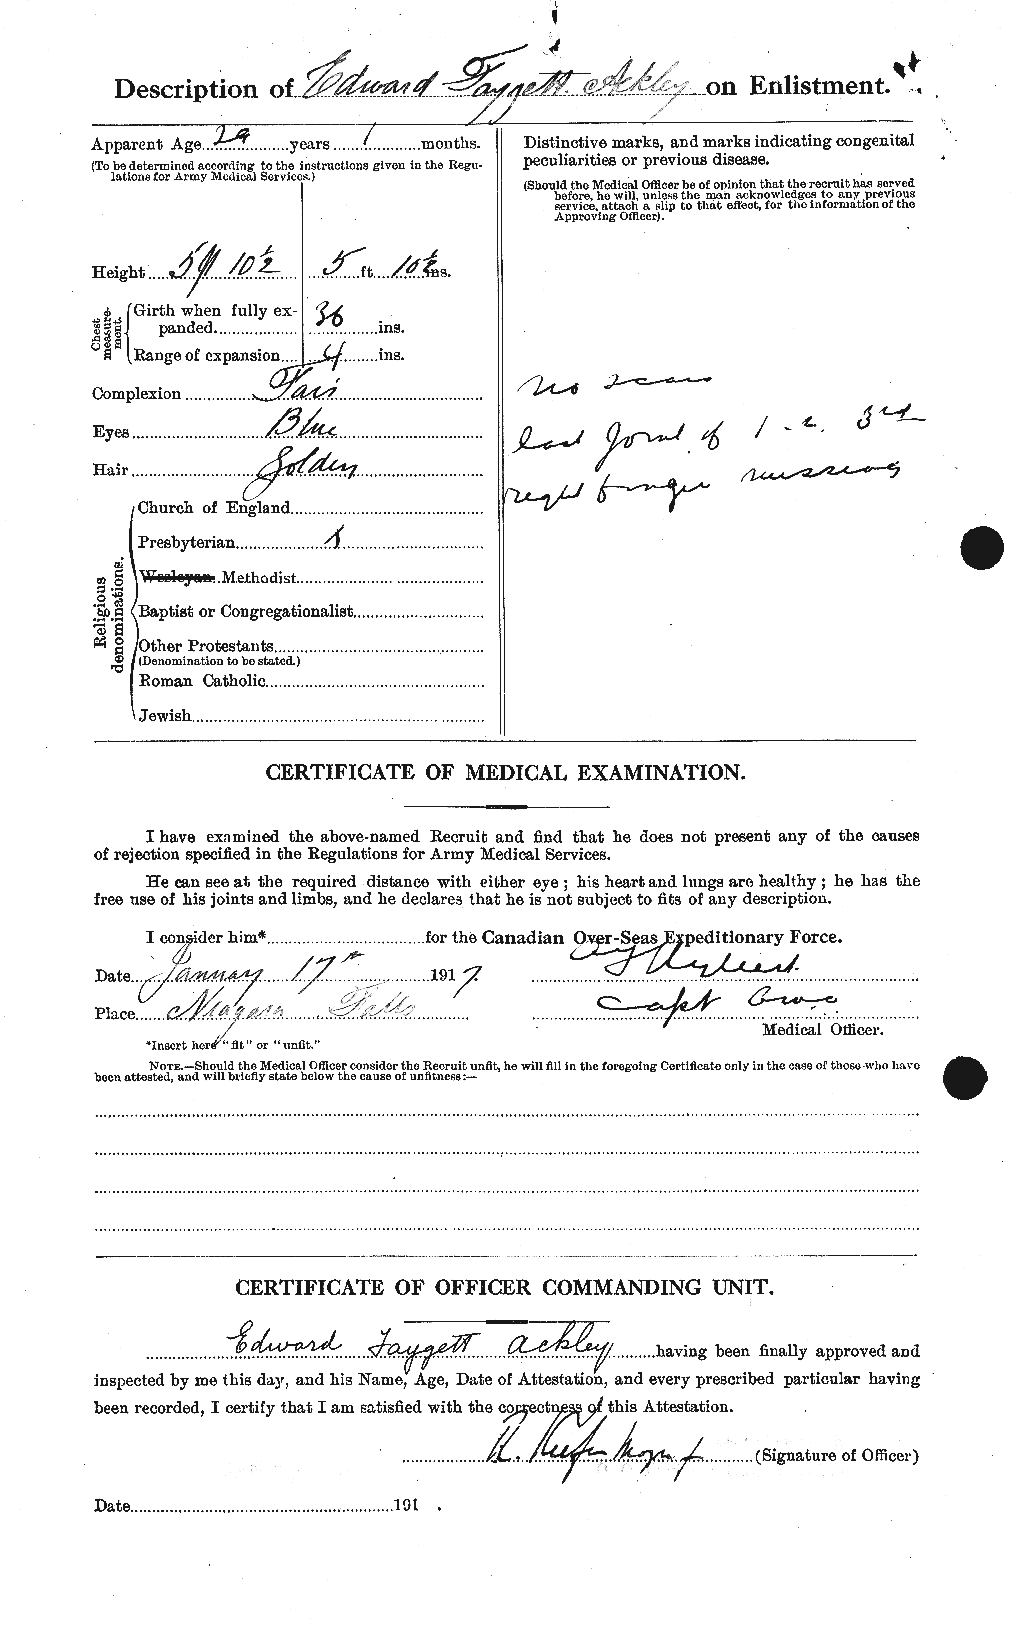 Personnel Records of the First World War - CEF 200697b